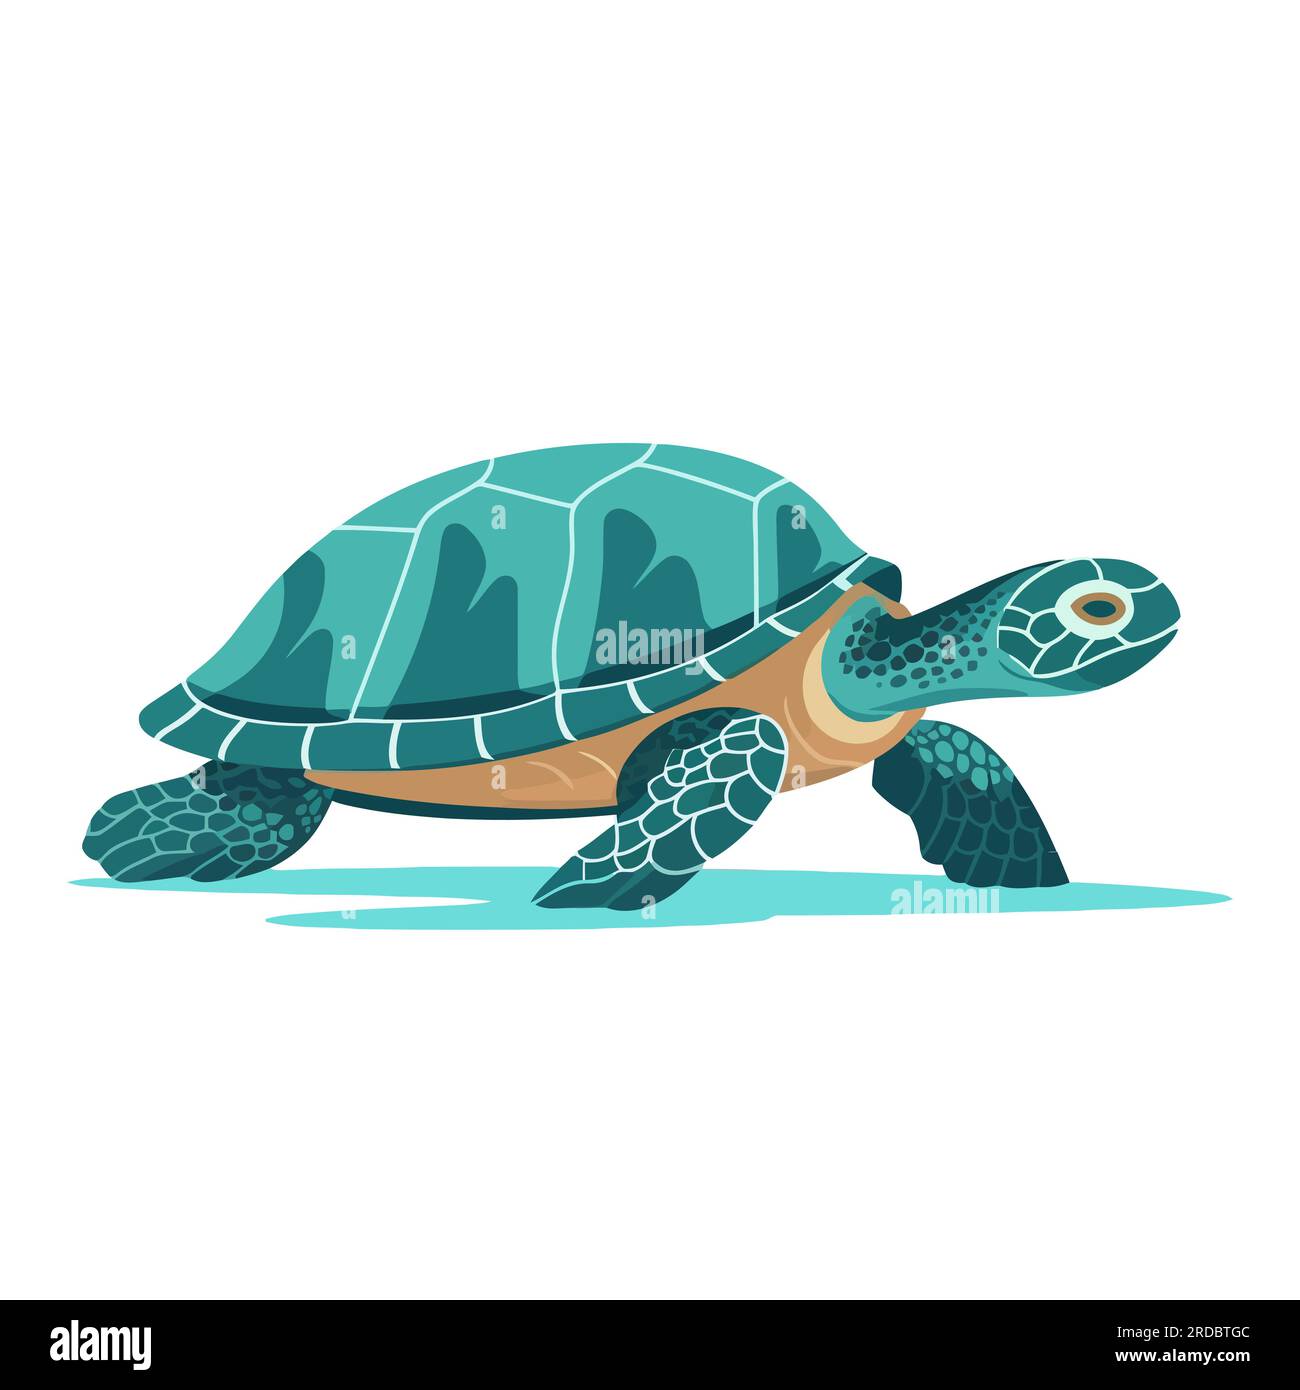 Turtle image. Abstract cute turtle. Stock Vector